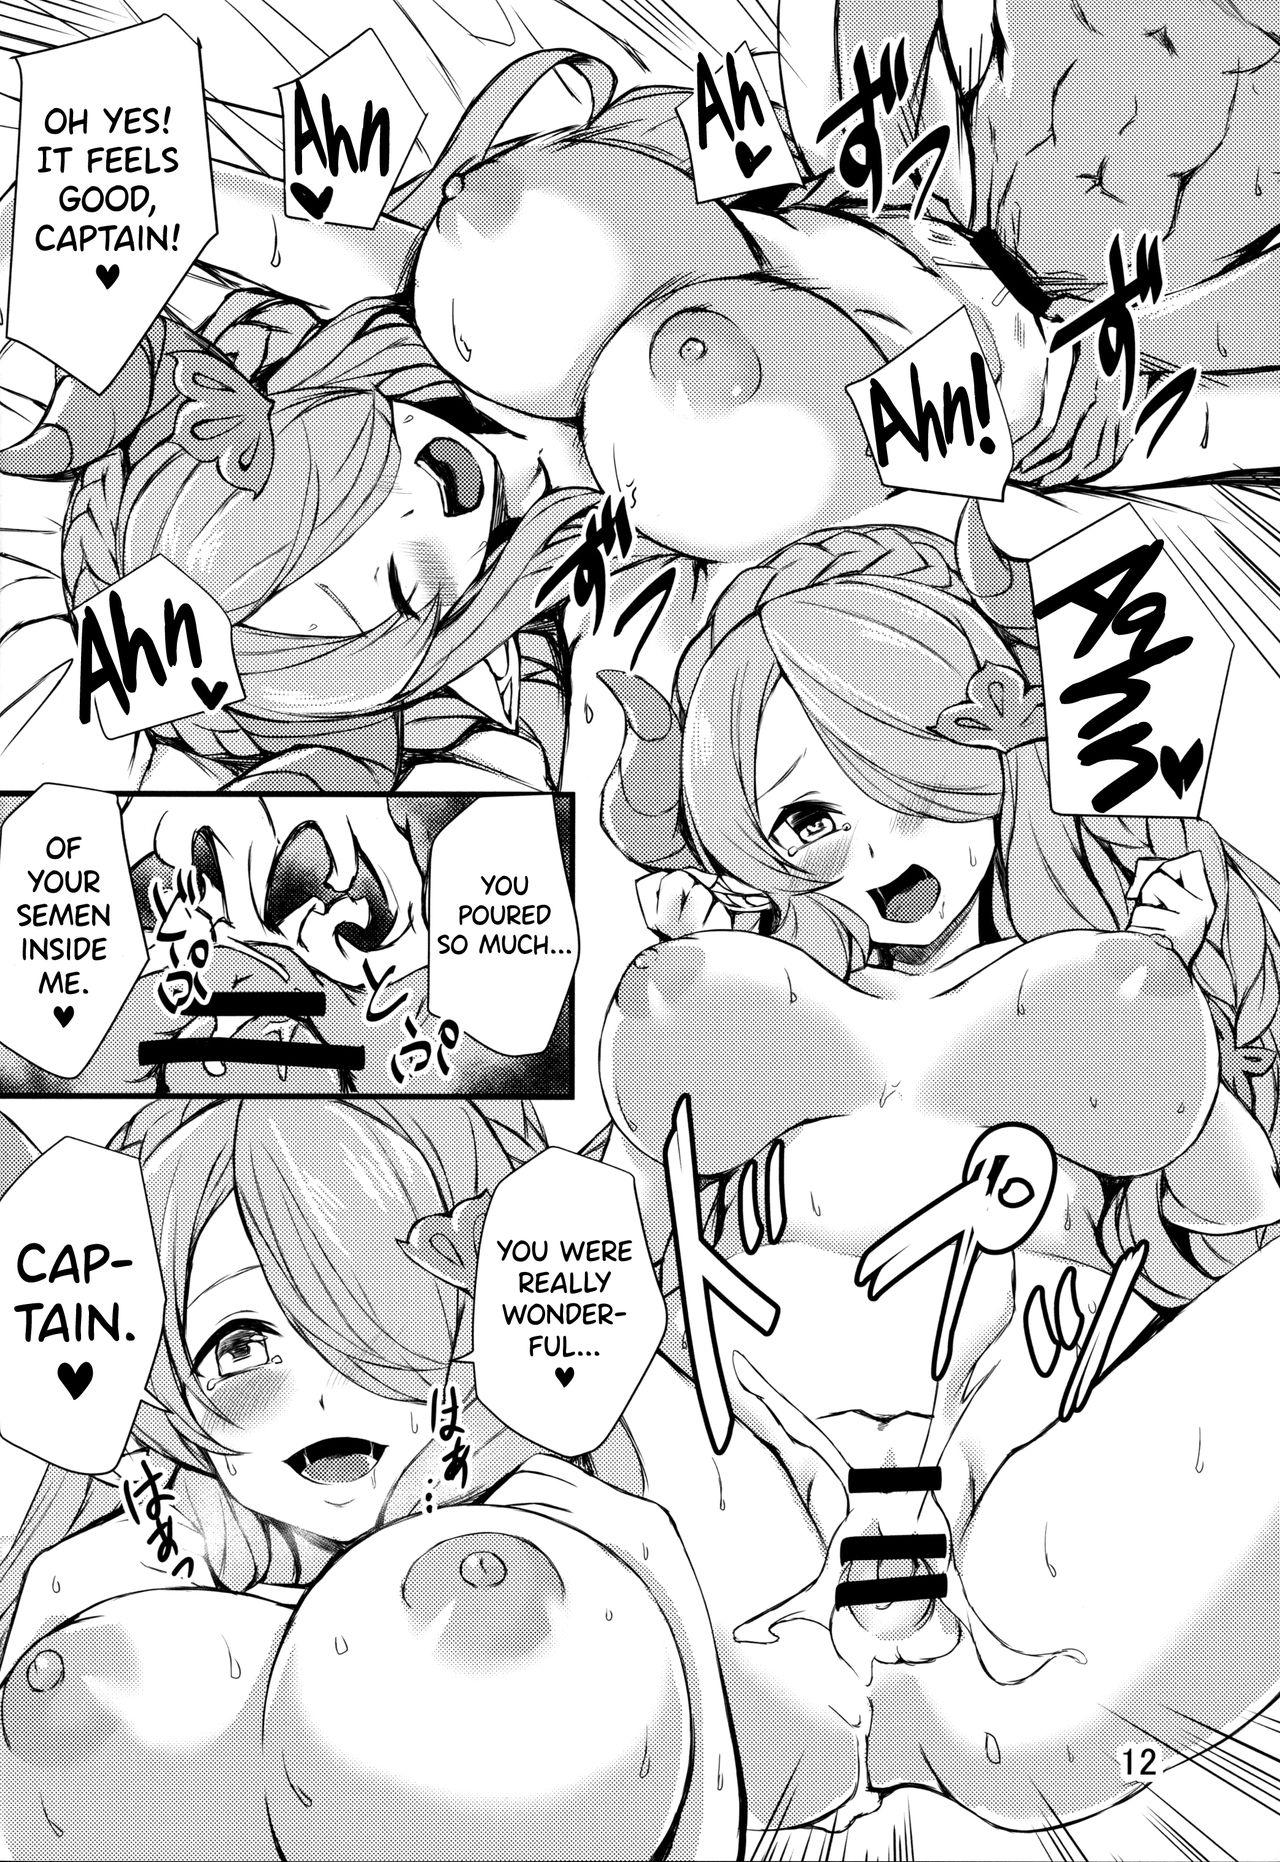 Best Blowjobs Sleepless Night at the Female Draph's Room - Granblue fantasy Real Amatuer Porn - Page 11